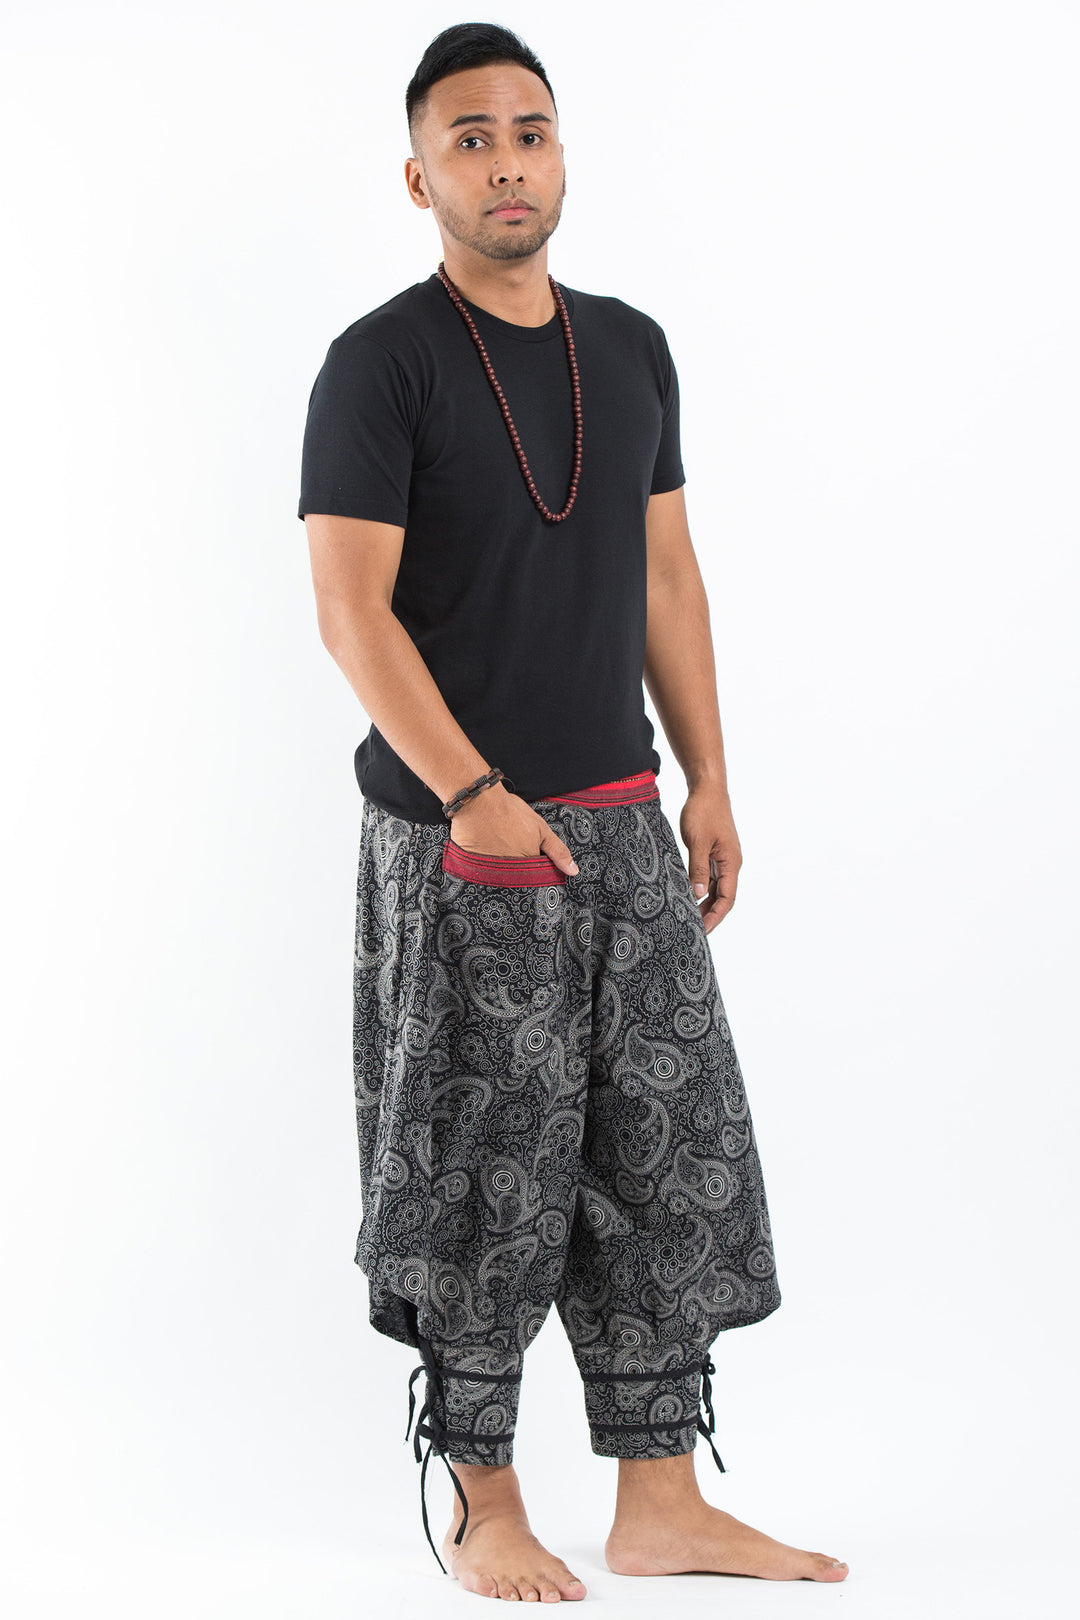 Paisley Thai Hill Tribe Fabric Men's High Cut Harem Pants with Ankle S